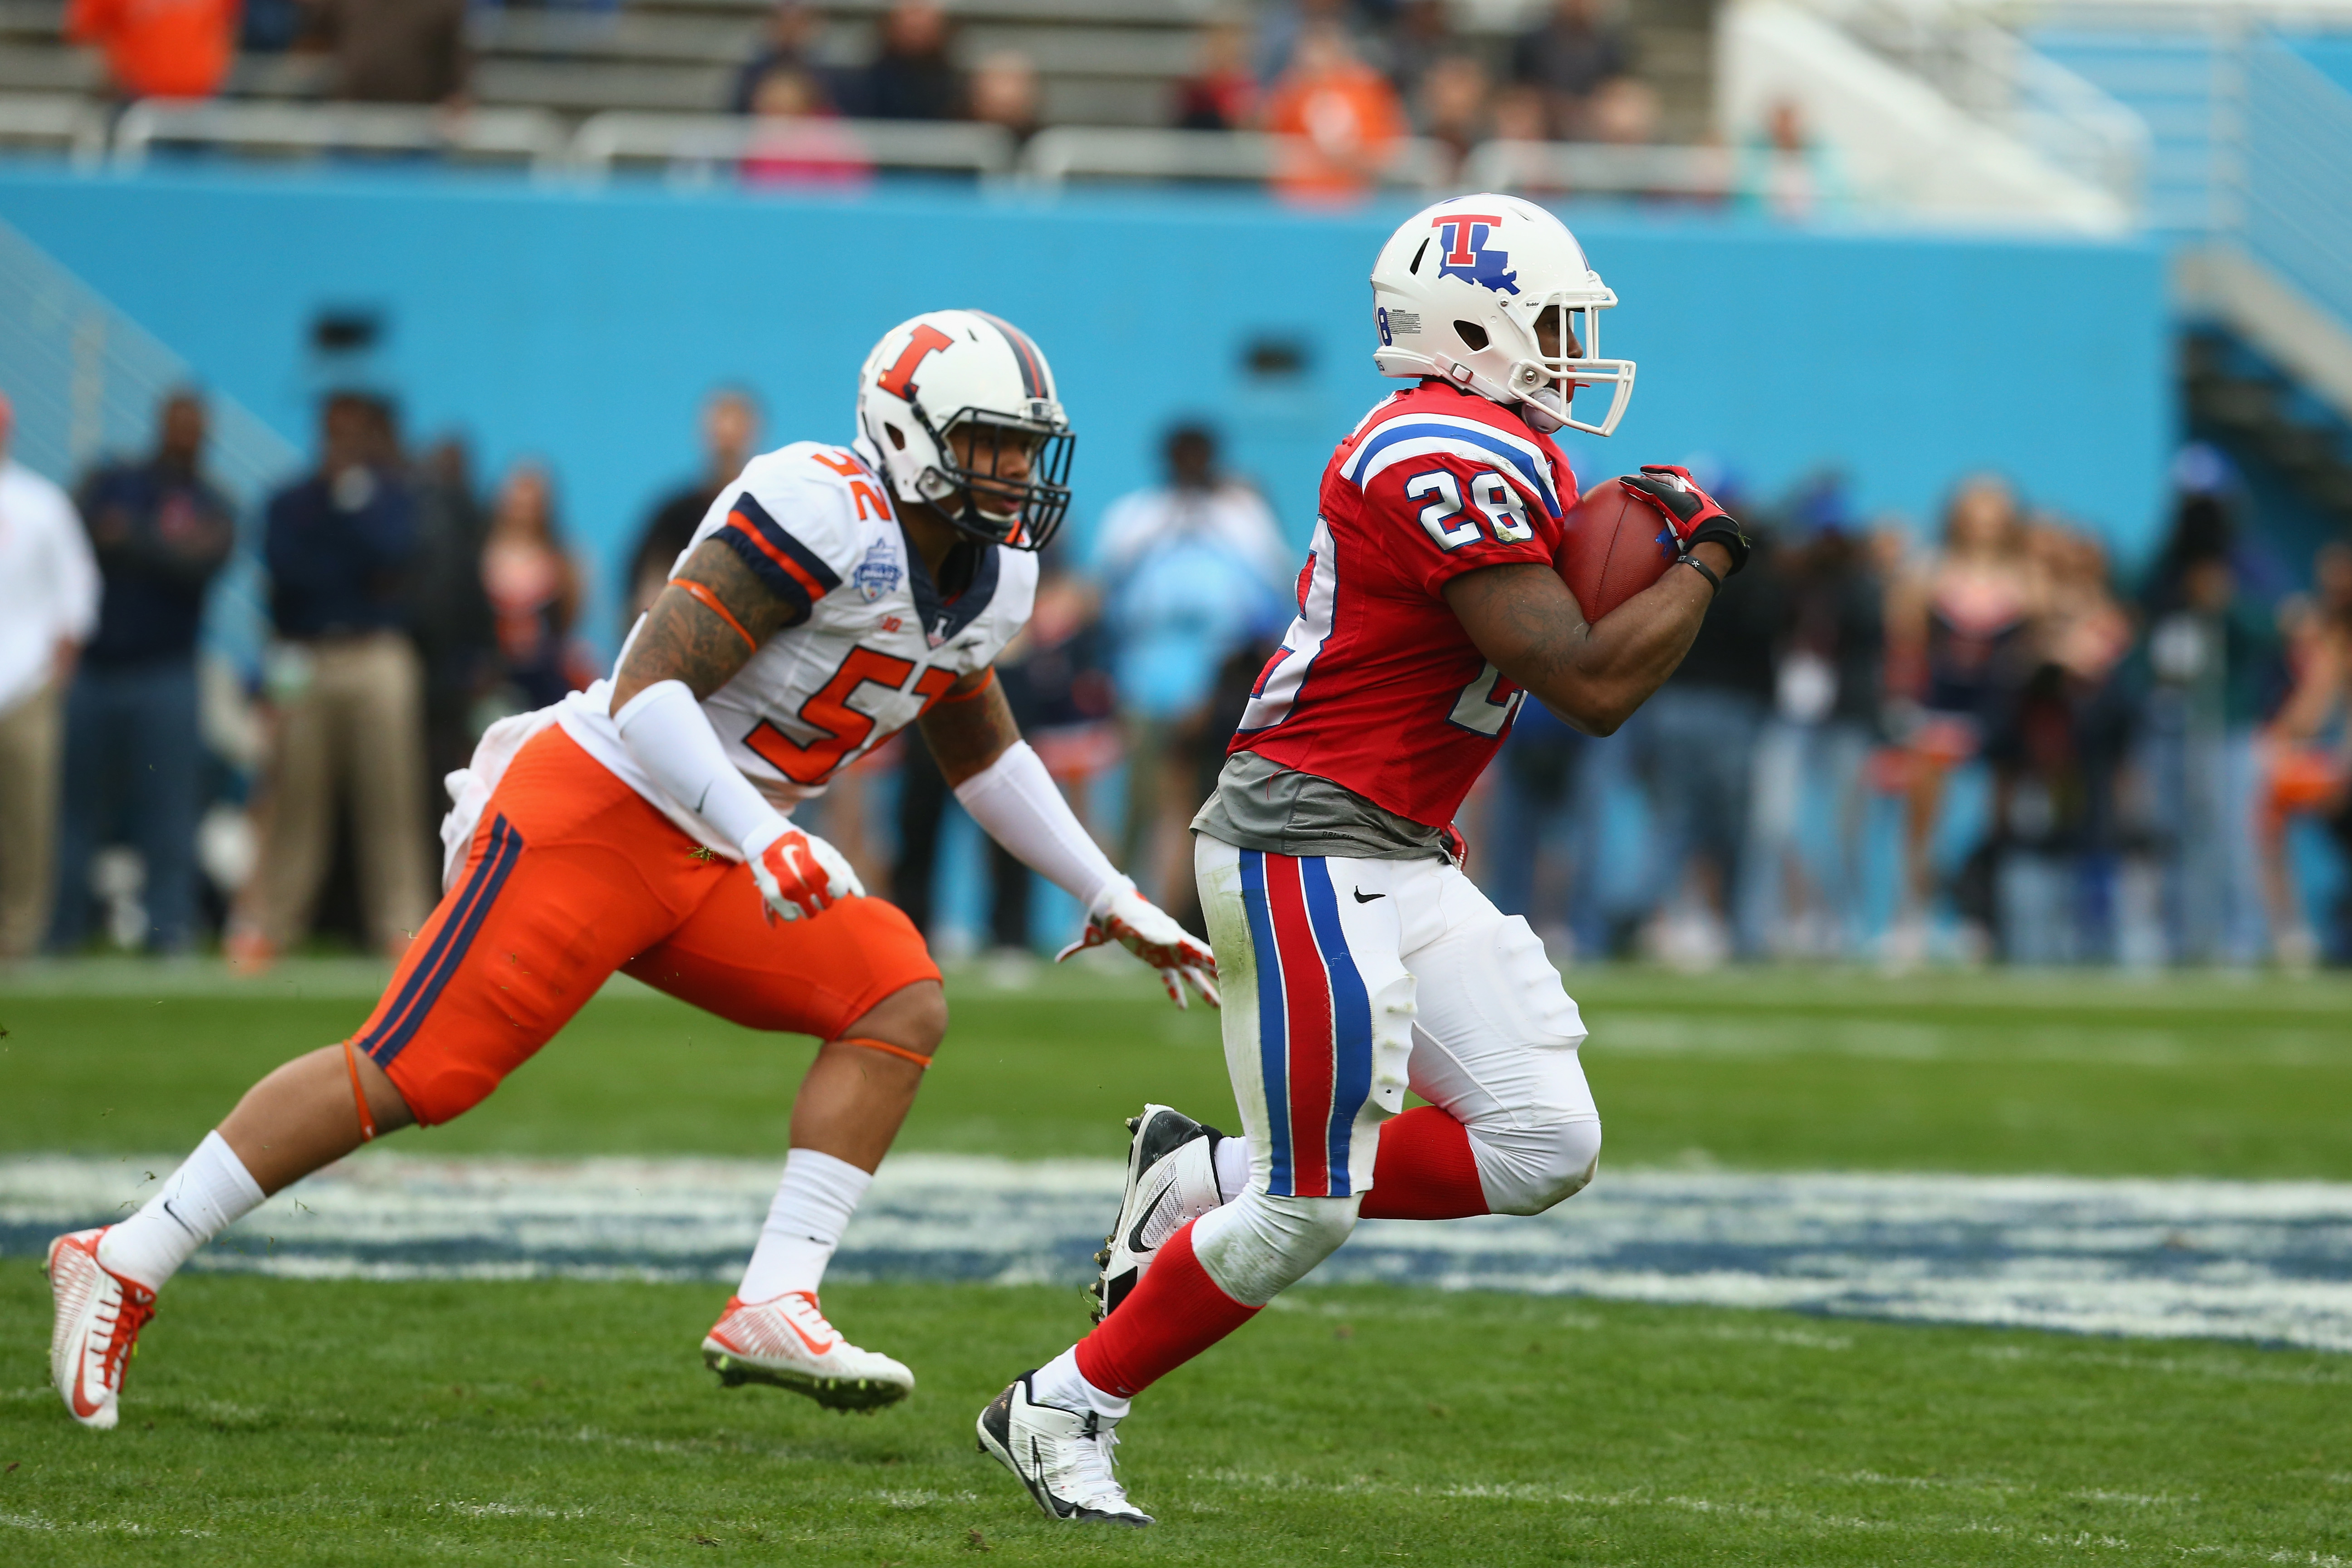 DALLAS, TX - DECEMBER 26:  Kenneth Dixon #28 of the Louisiana Tech Bulldogs runs the ball past Alex Hill #52 of the Illinois Fighting Illini during the Zaxby's Heart of Dallas Bowl at Cotton Bowl on December 26, 2014 in Dallas, Texas.  (Photo by Ronald Martinez/Getty Images)